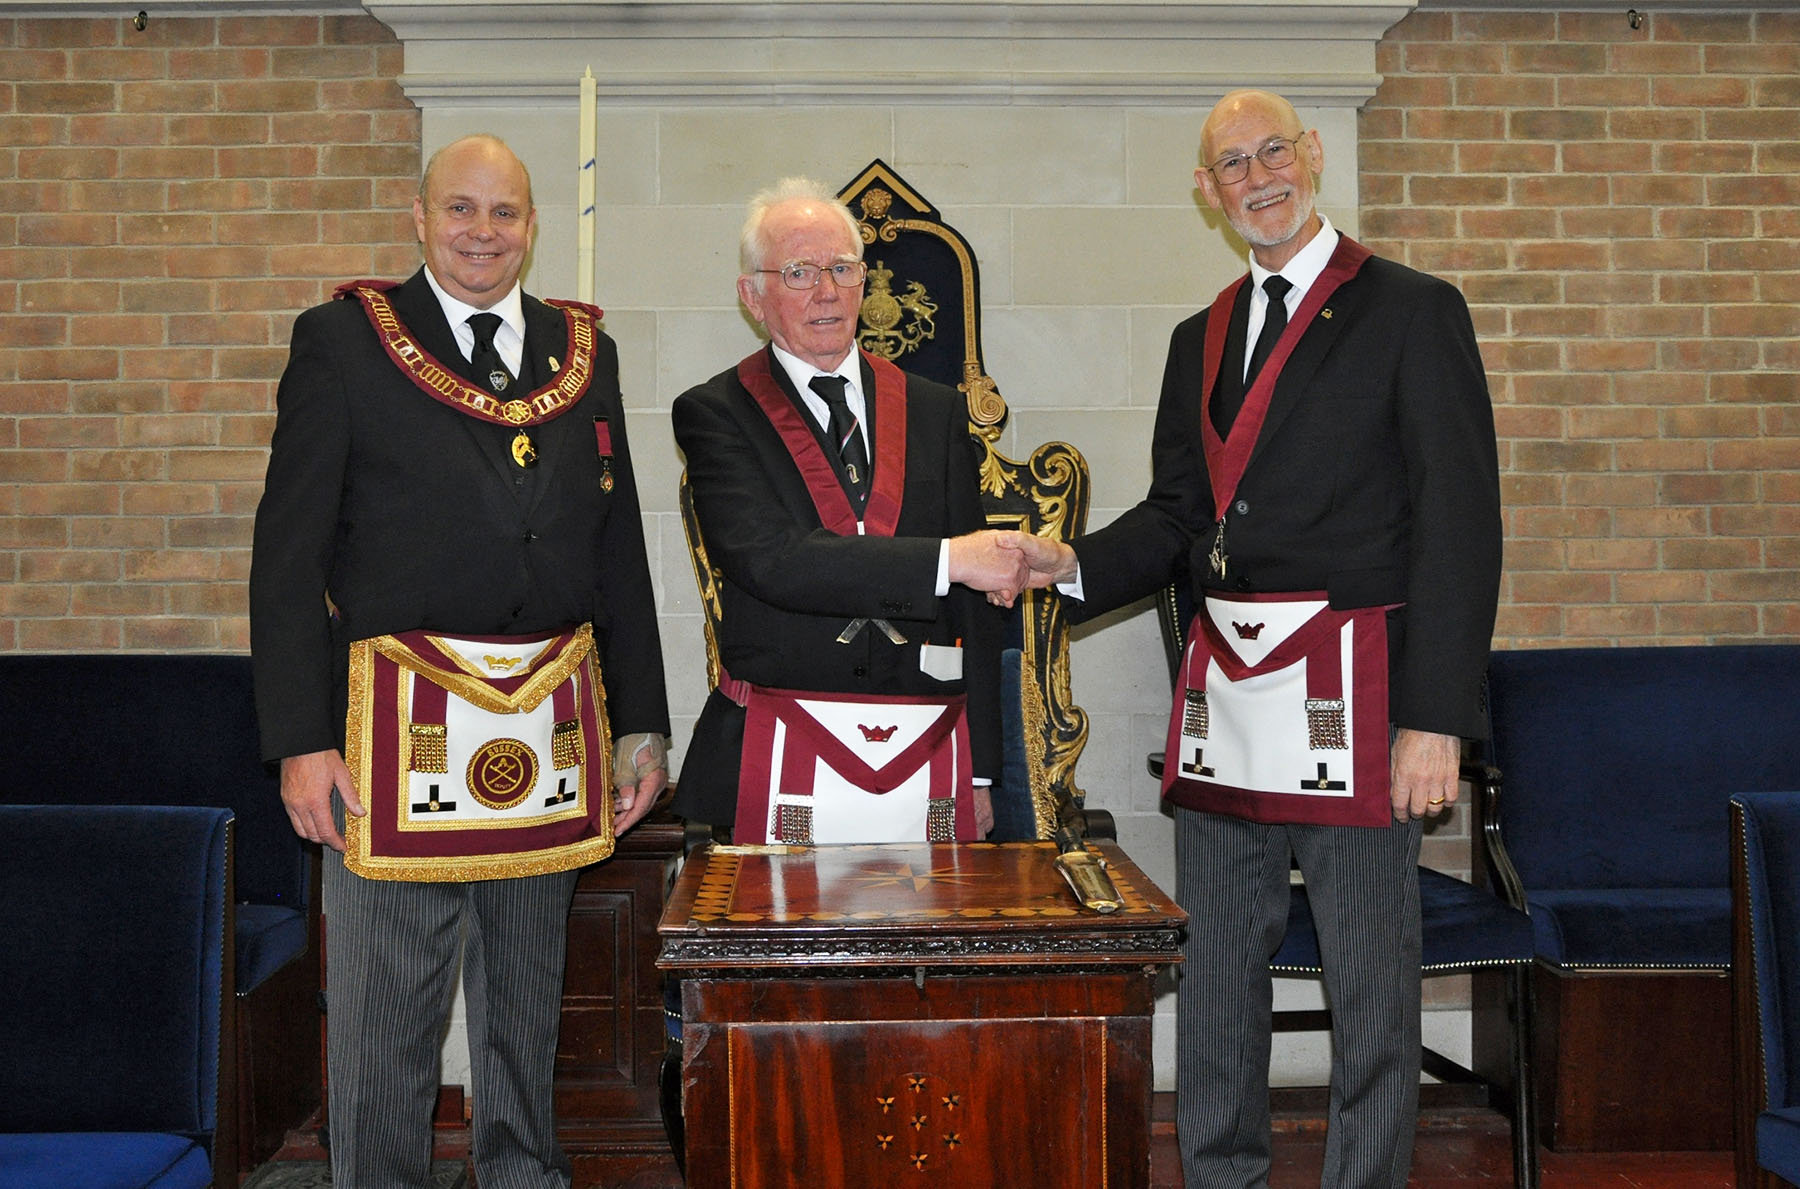 Official Visit by the Deputy Provincial Grand Master to The Court of King Alfred the Great